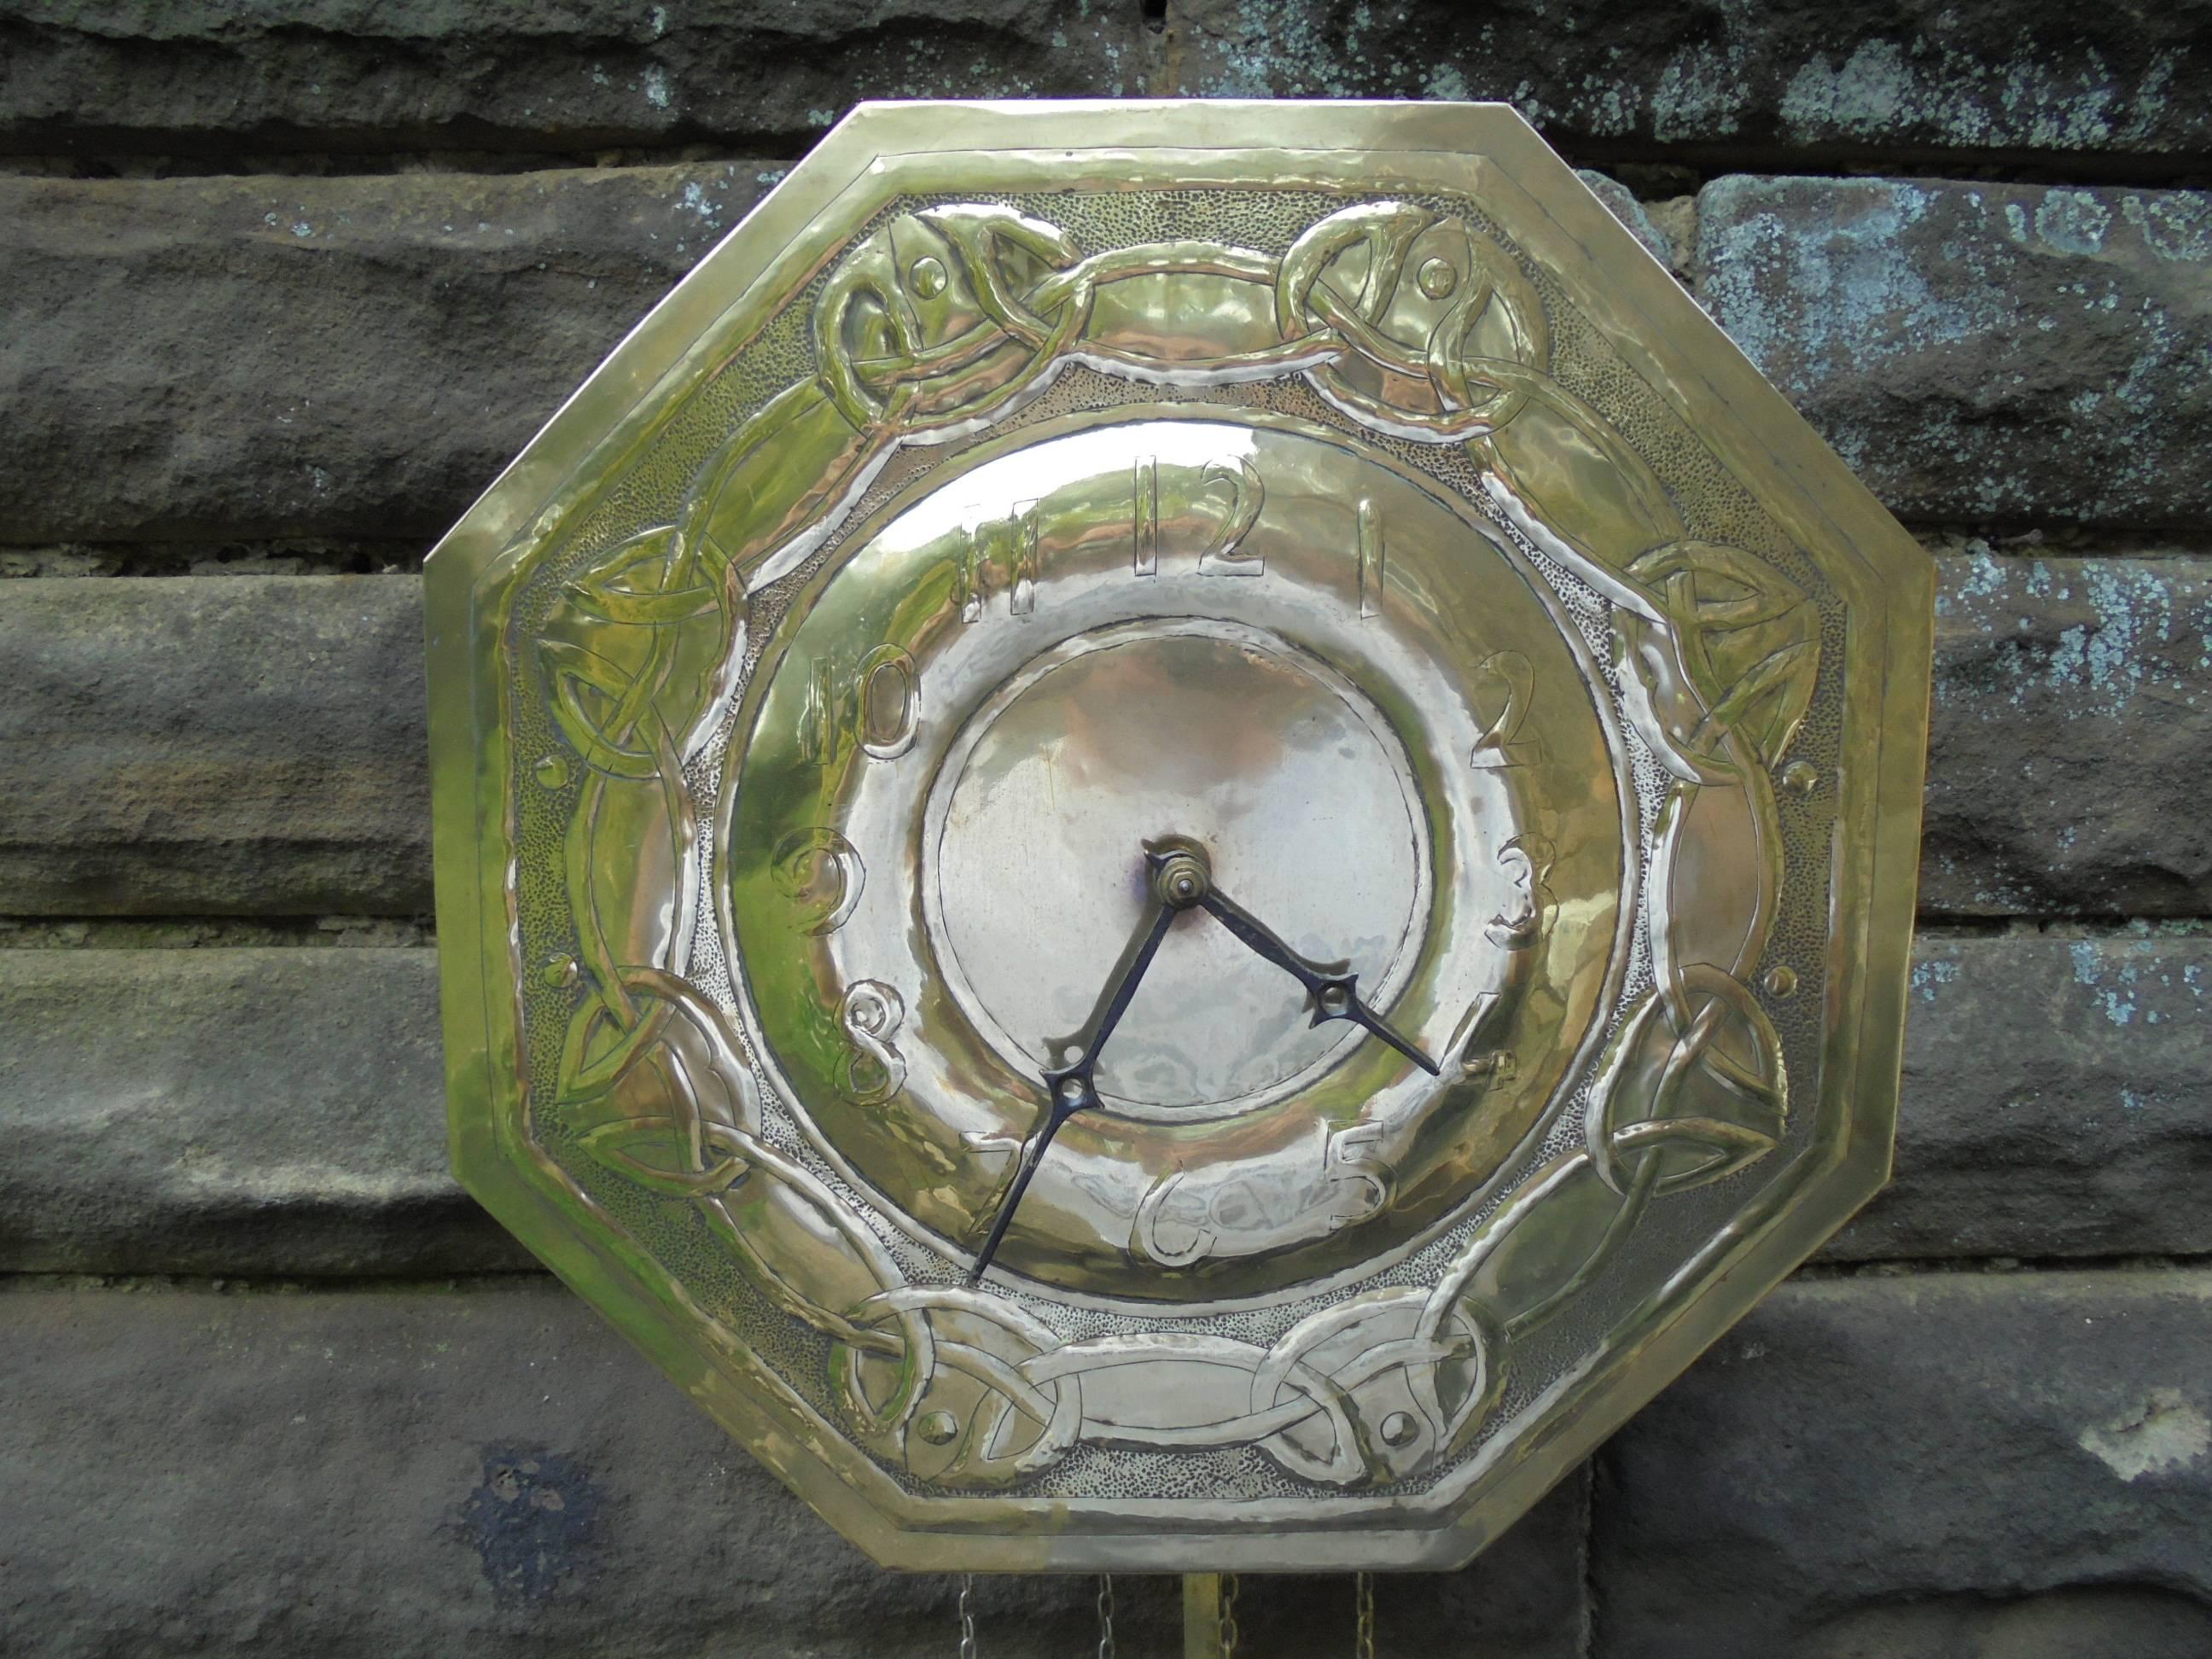 Offered for sale is this rare arts and crafts Glasgow school brass wall clock

Dating from 1900-1905. In the manner of Margaret Gilmour but unmarked. Brass dial with typical Celtic knot repousse decoration. Weight driven movement with the weights